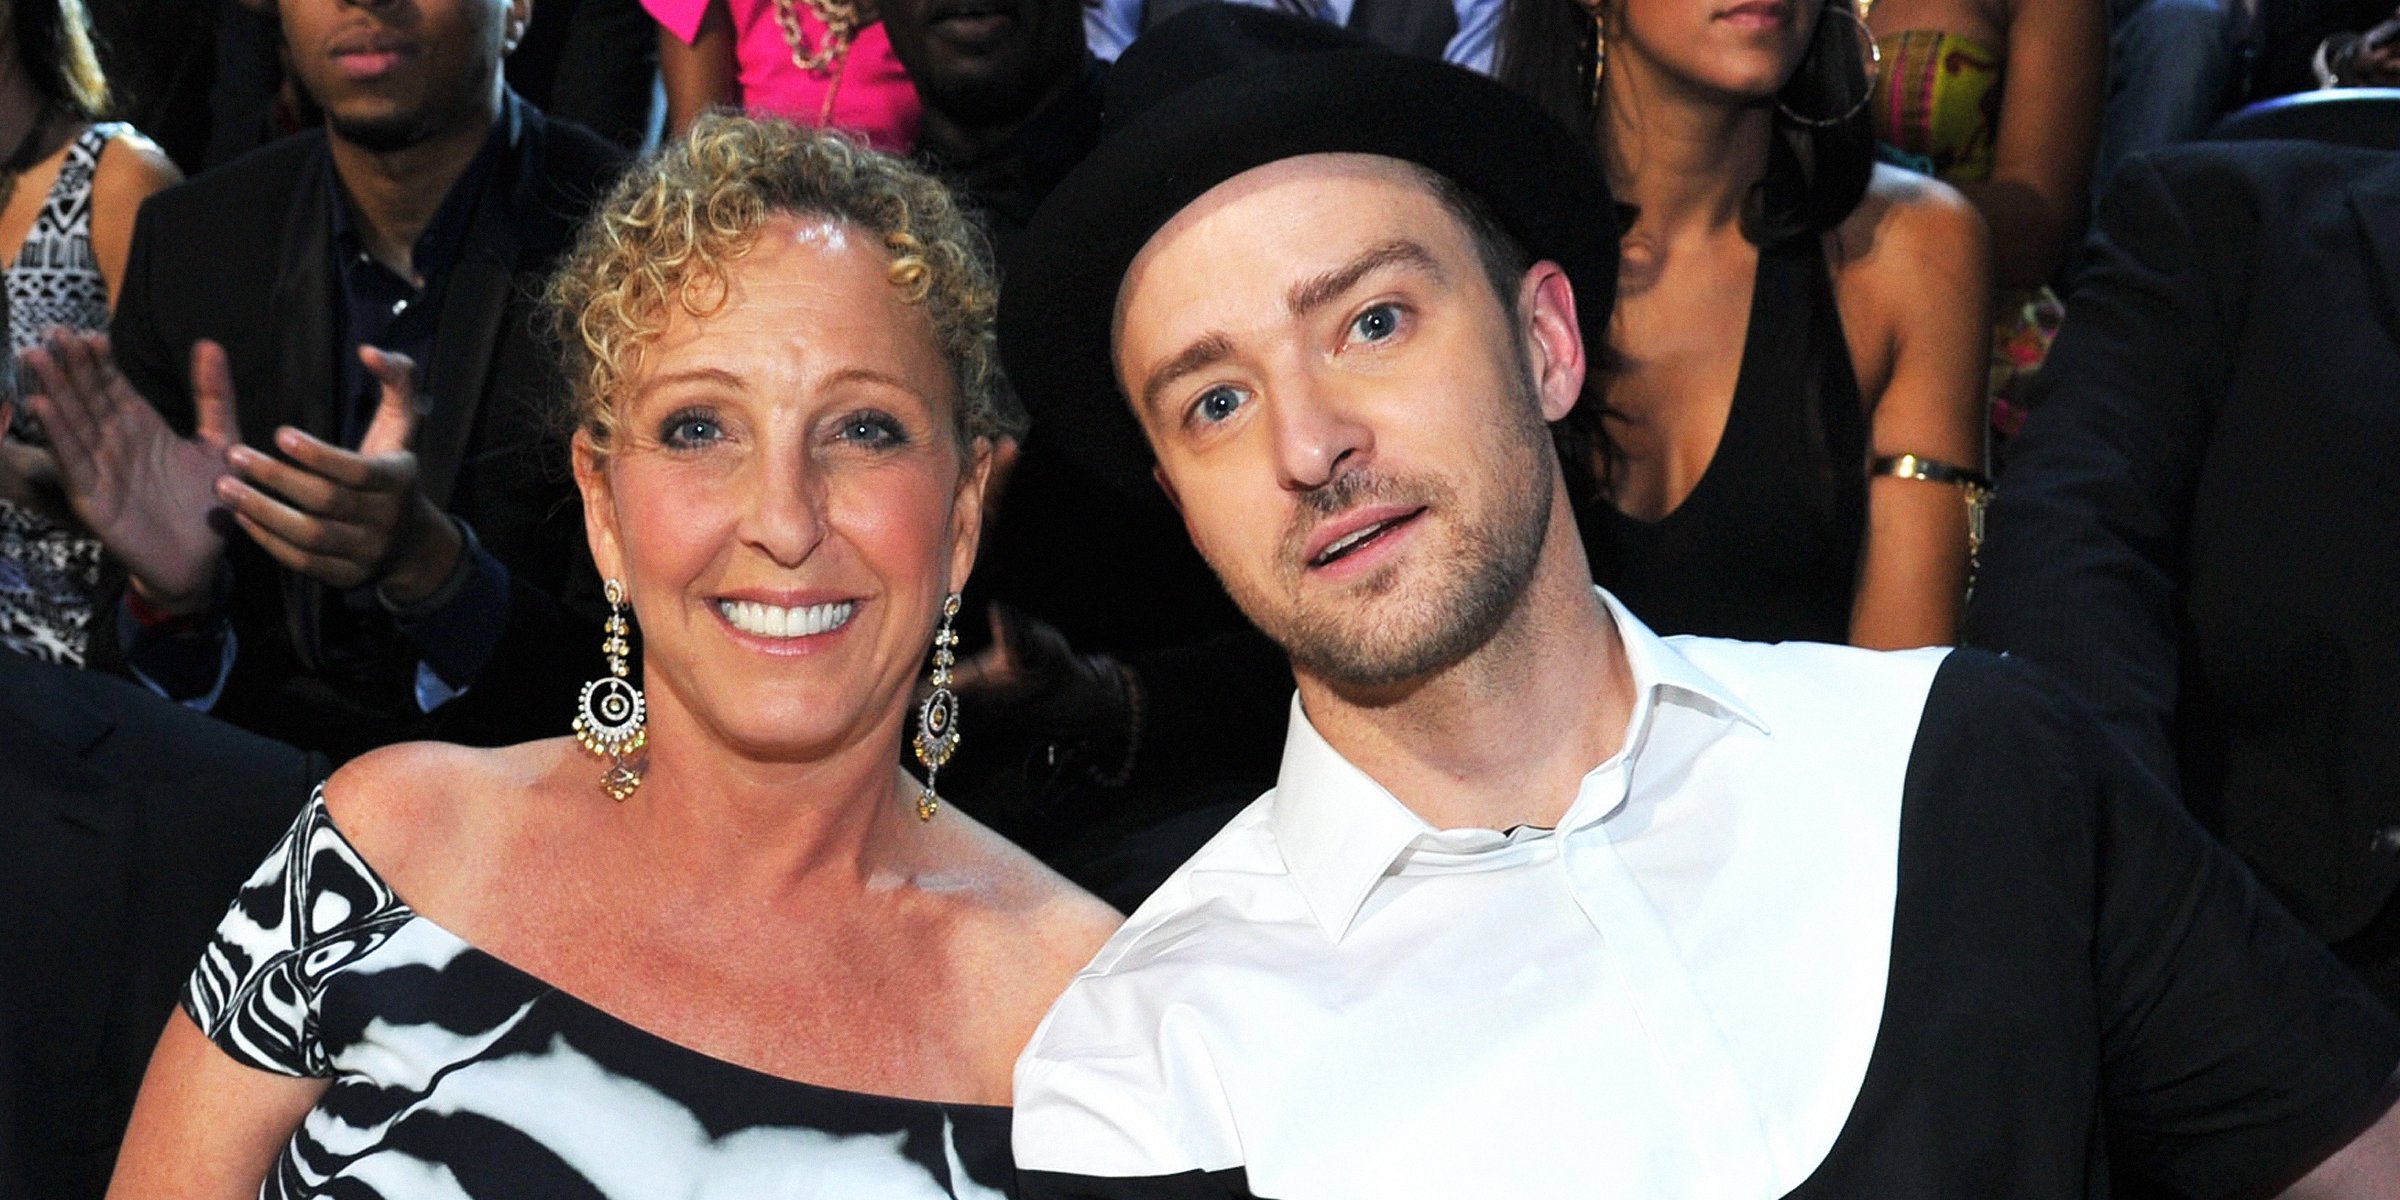 Lynn Harless and Justin Timberlake | Source: Getty Images